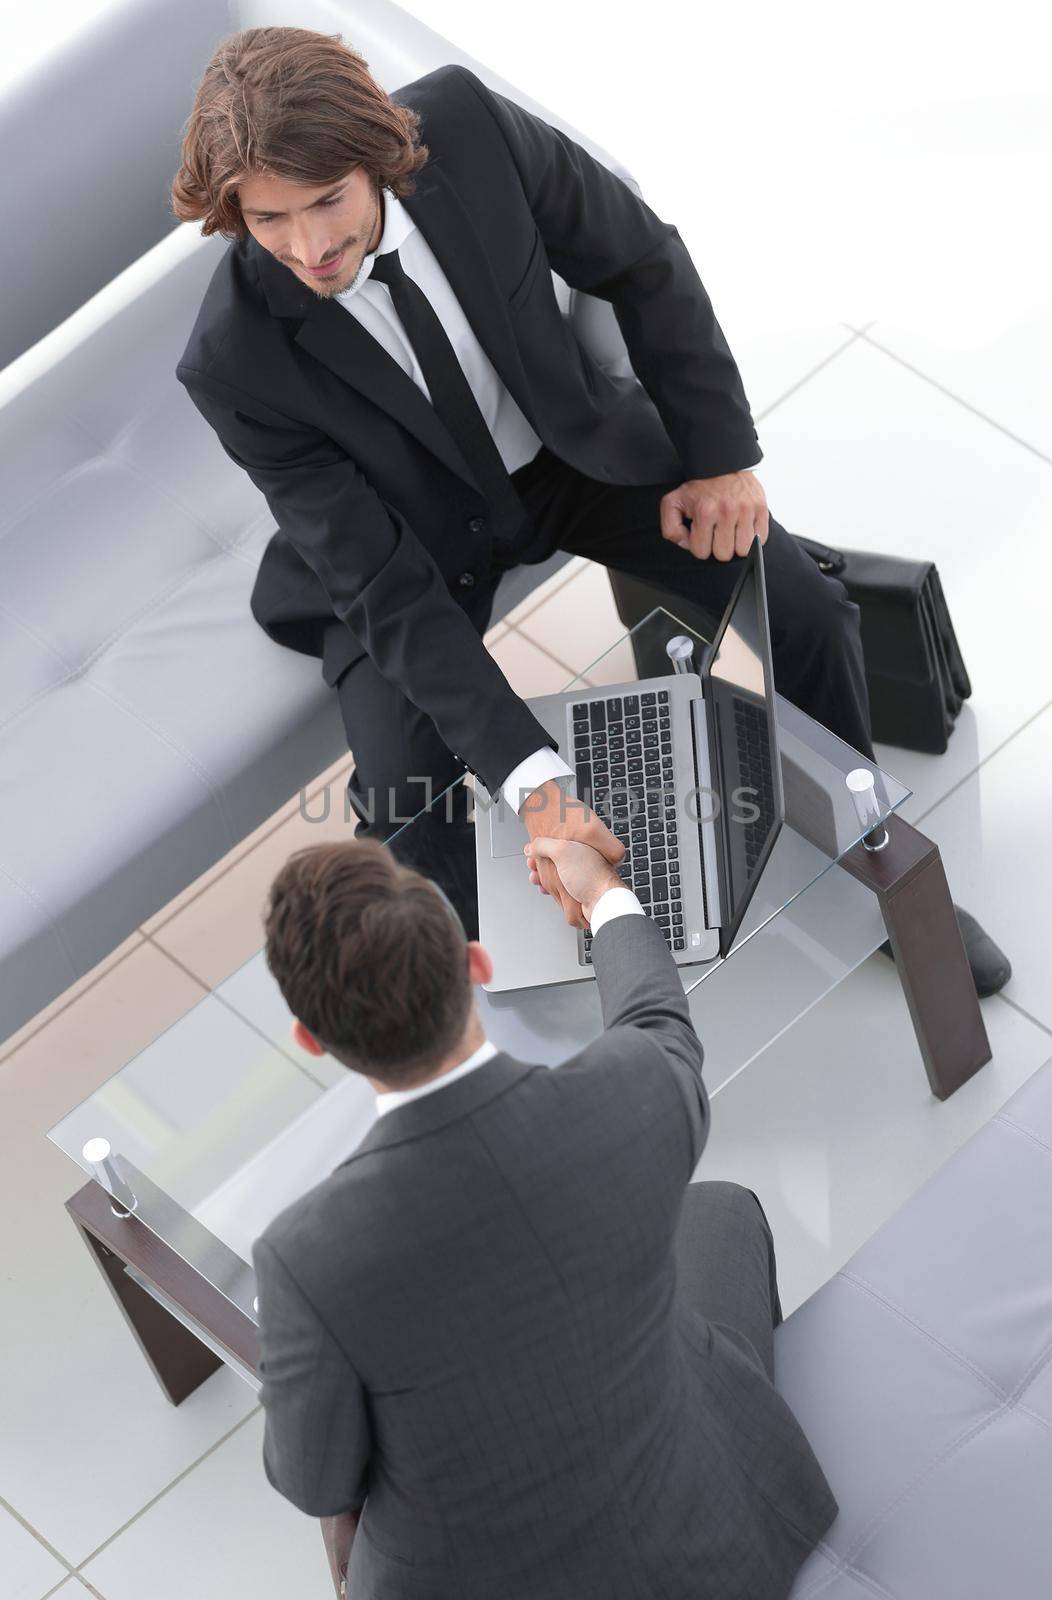 handshake business people in the workplace.business concept